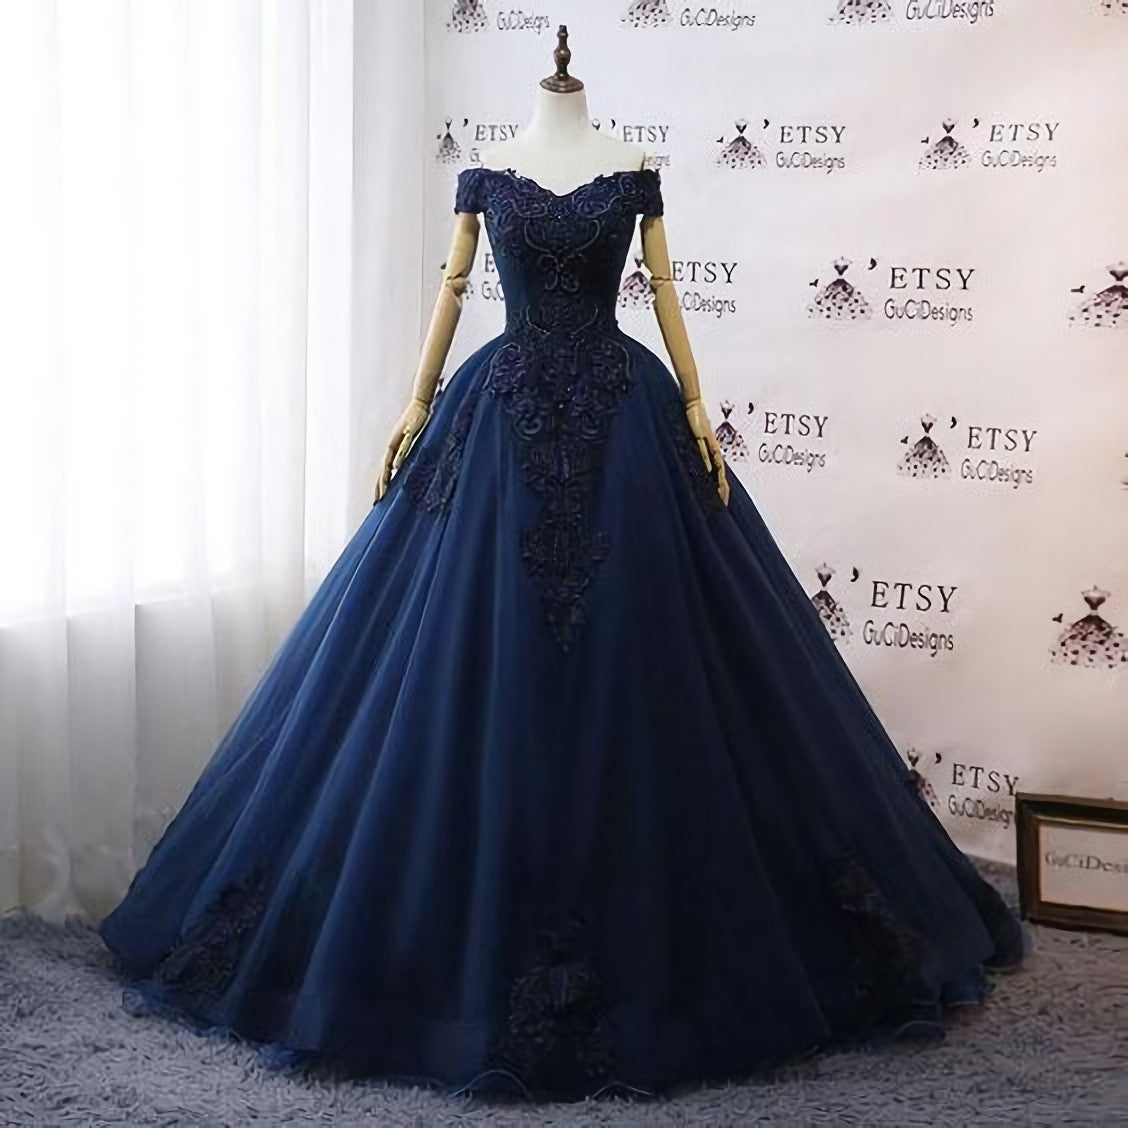 Wedding Dress And Shoe, Prom Dresses, Navy Blue Wedding Dresses, Floral Lace Ball Gown Off Shoulder Evening Dress